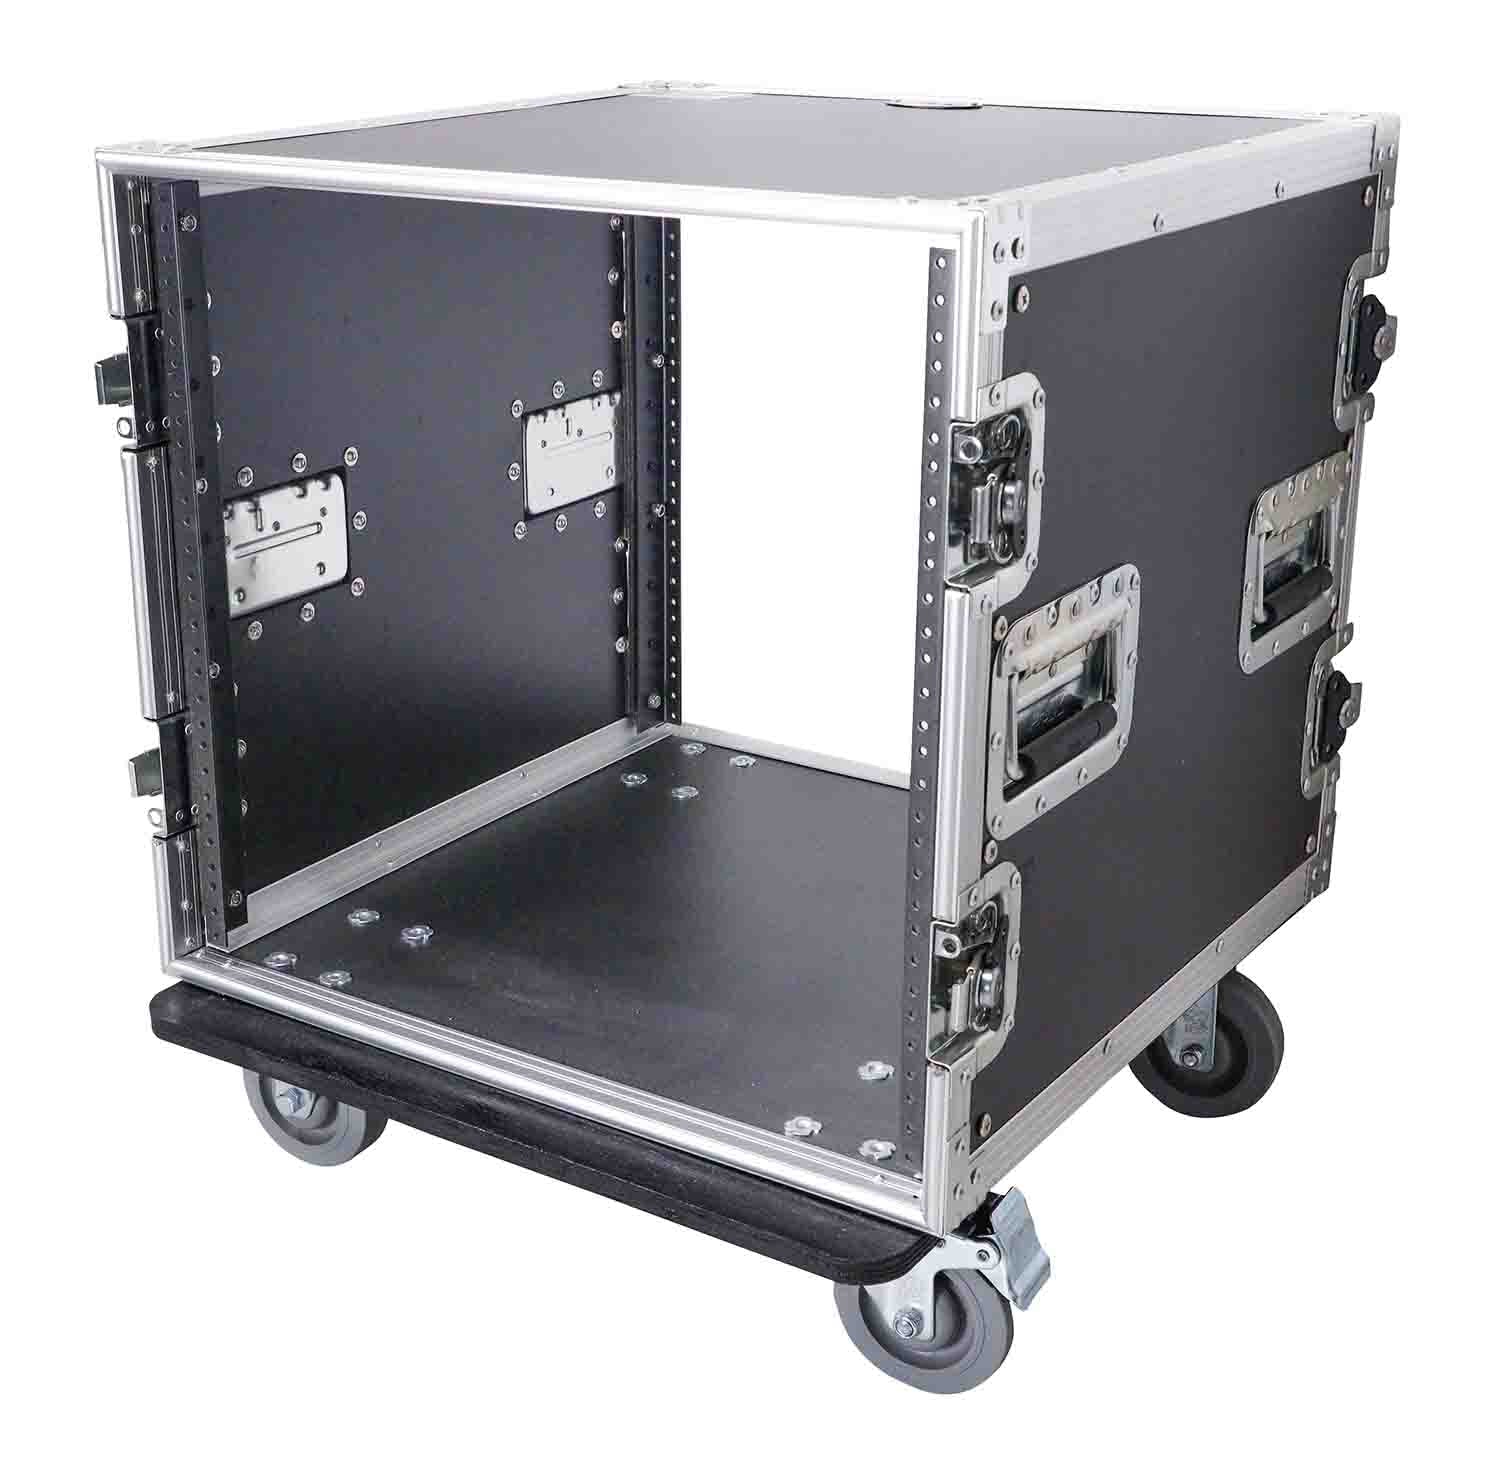 ProX T-10RSS, 10U Space Rack Mount Flight Case 19 Inch Depth with Casters - Hollywood DJ